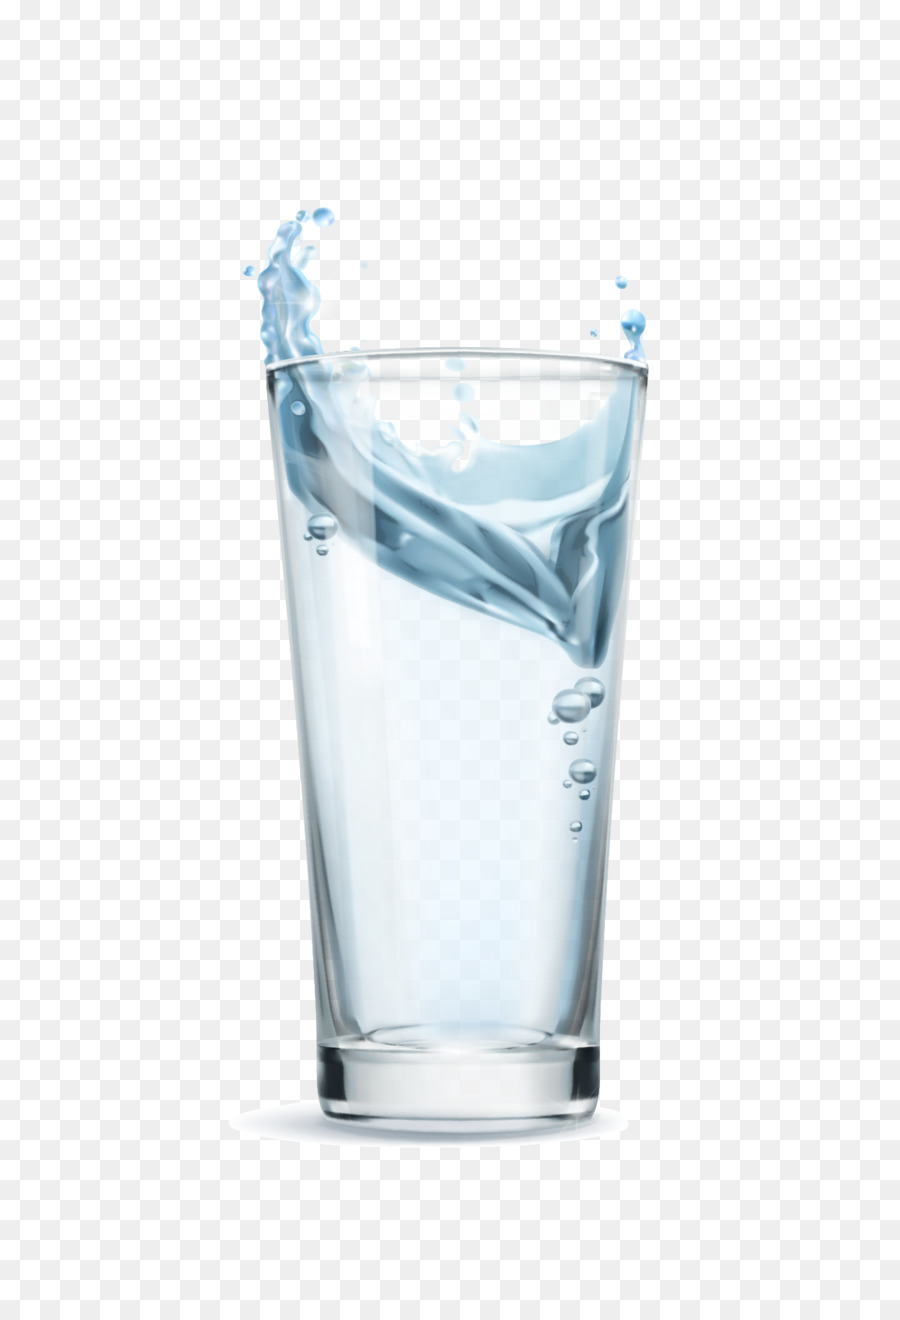 A glass of water Vector material png download - 891*1801 - Free Transparent Water png Download.